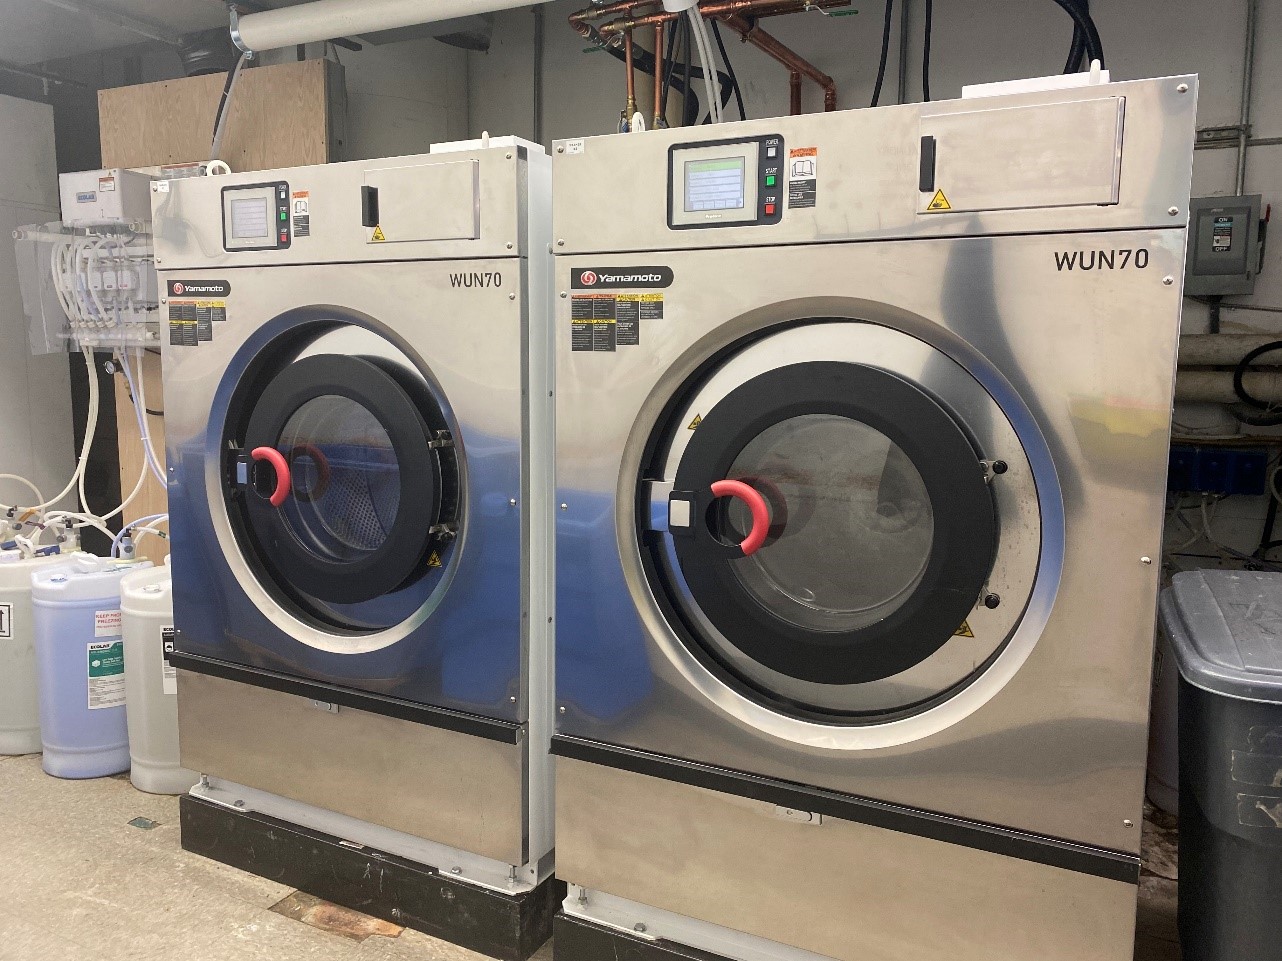 A pair of Industrial Washing Machines in Iowa